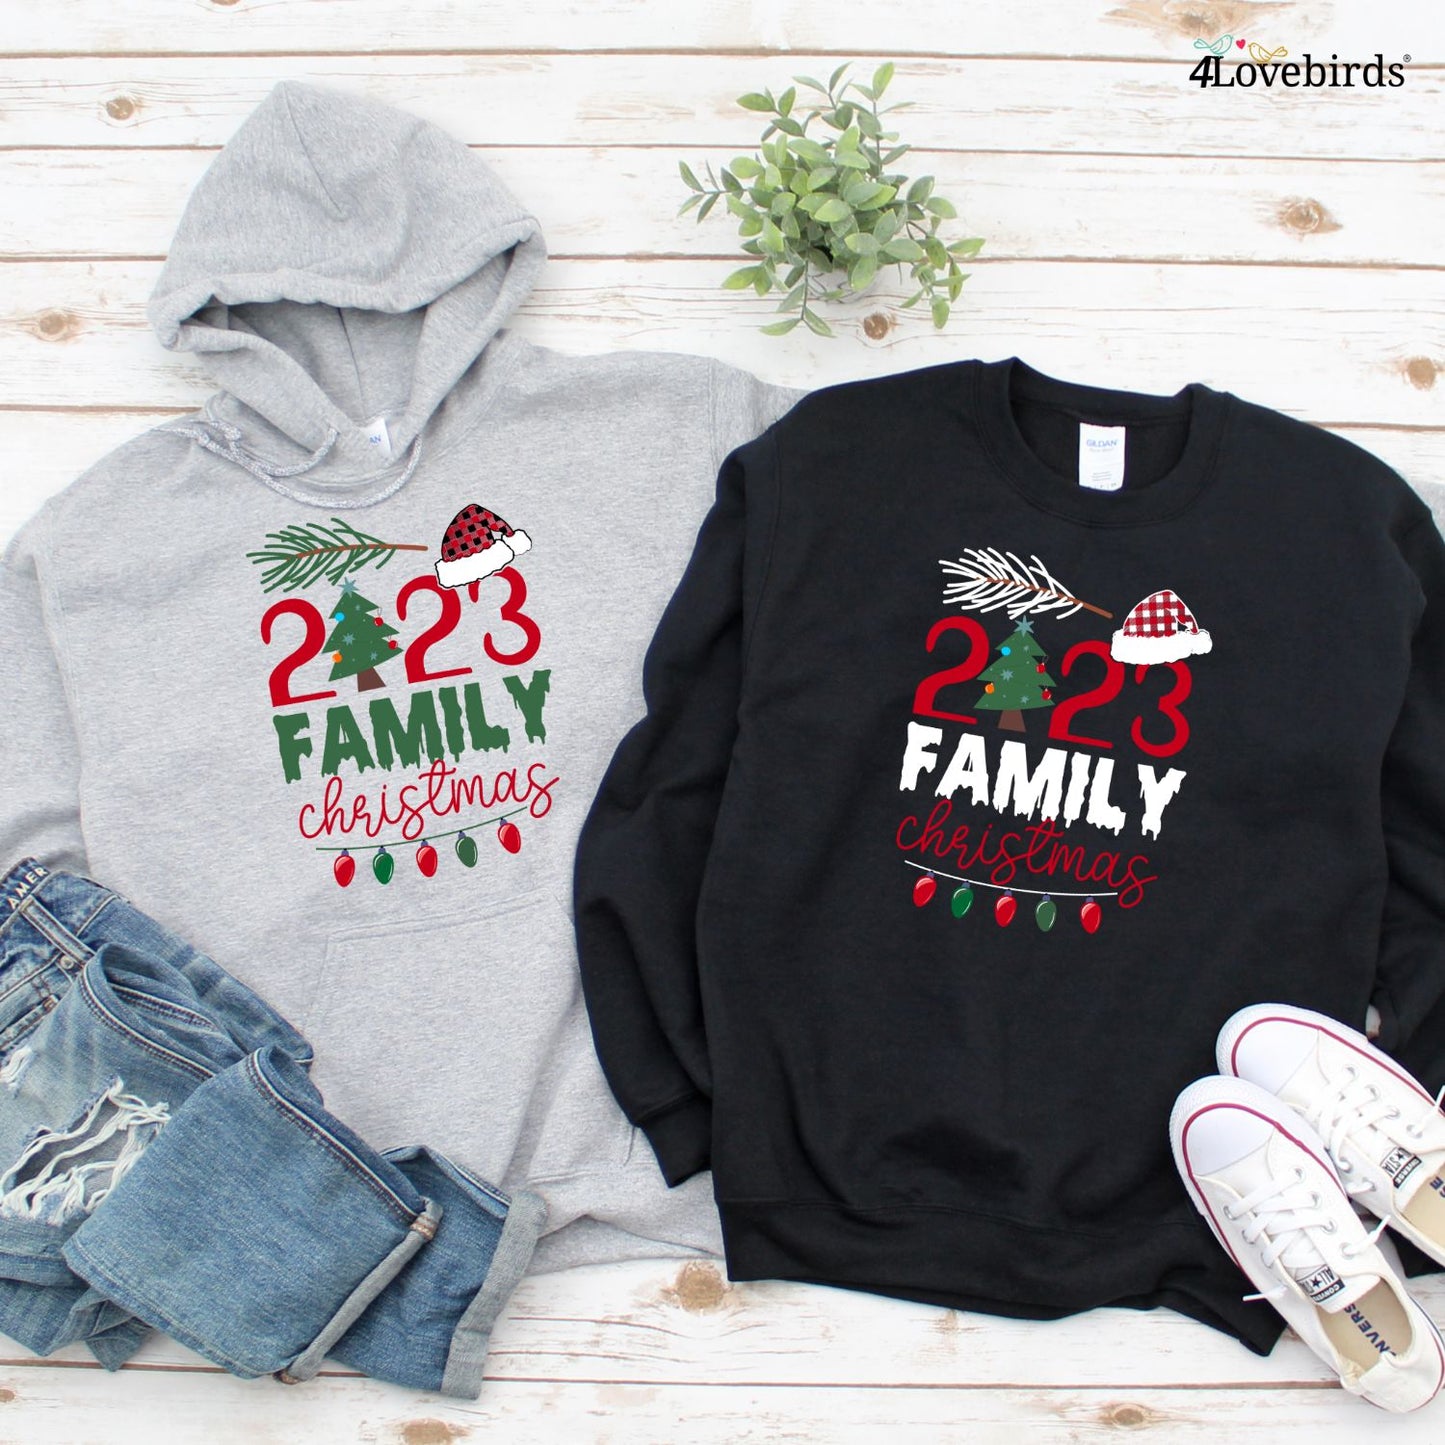 Family Christmas 2023 Santa Design Matching Set - Perfect Holiday Party Attire and Gifts